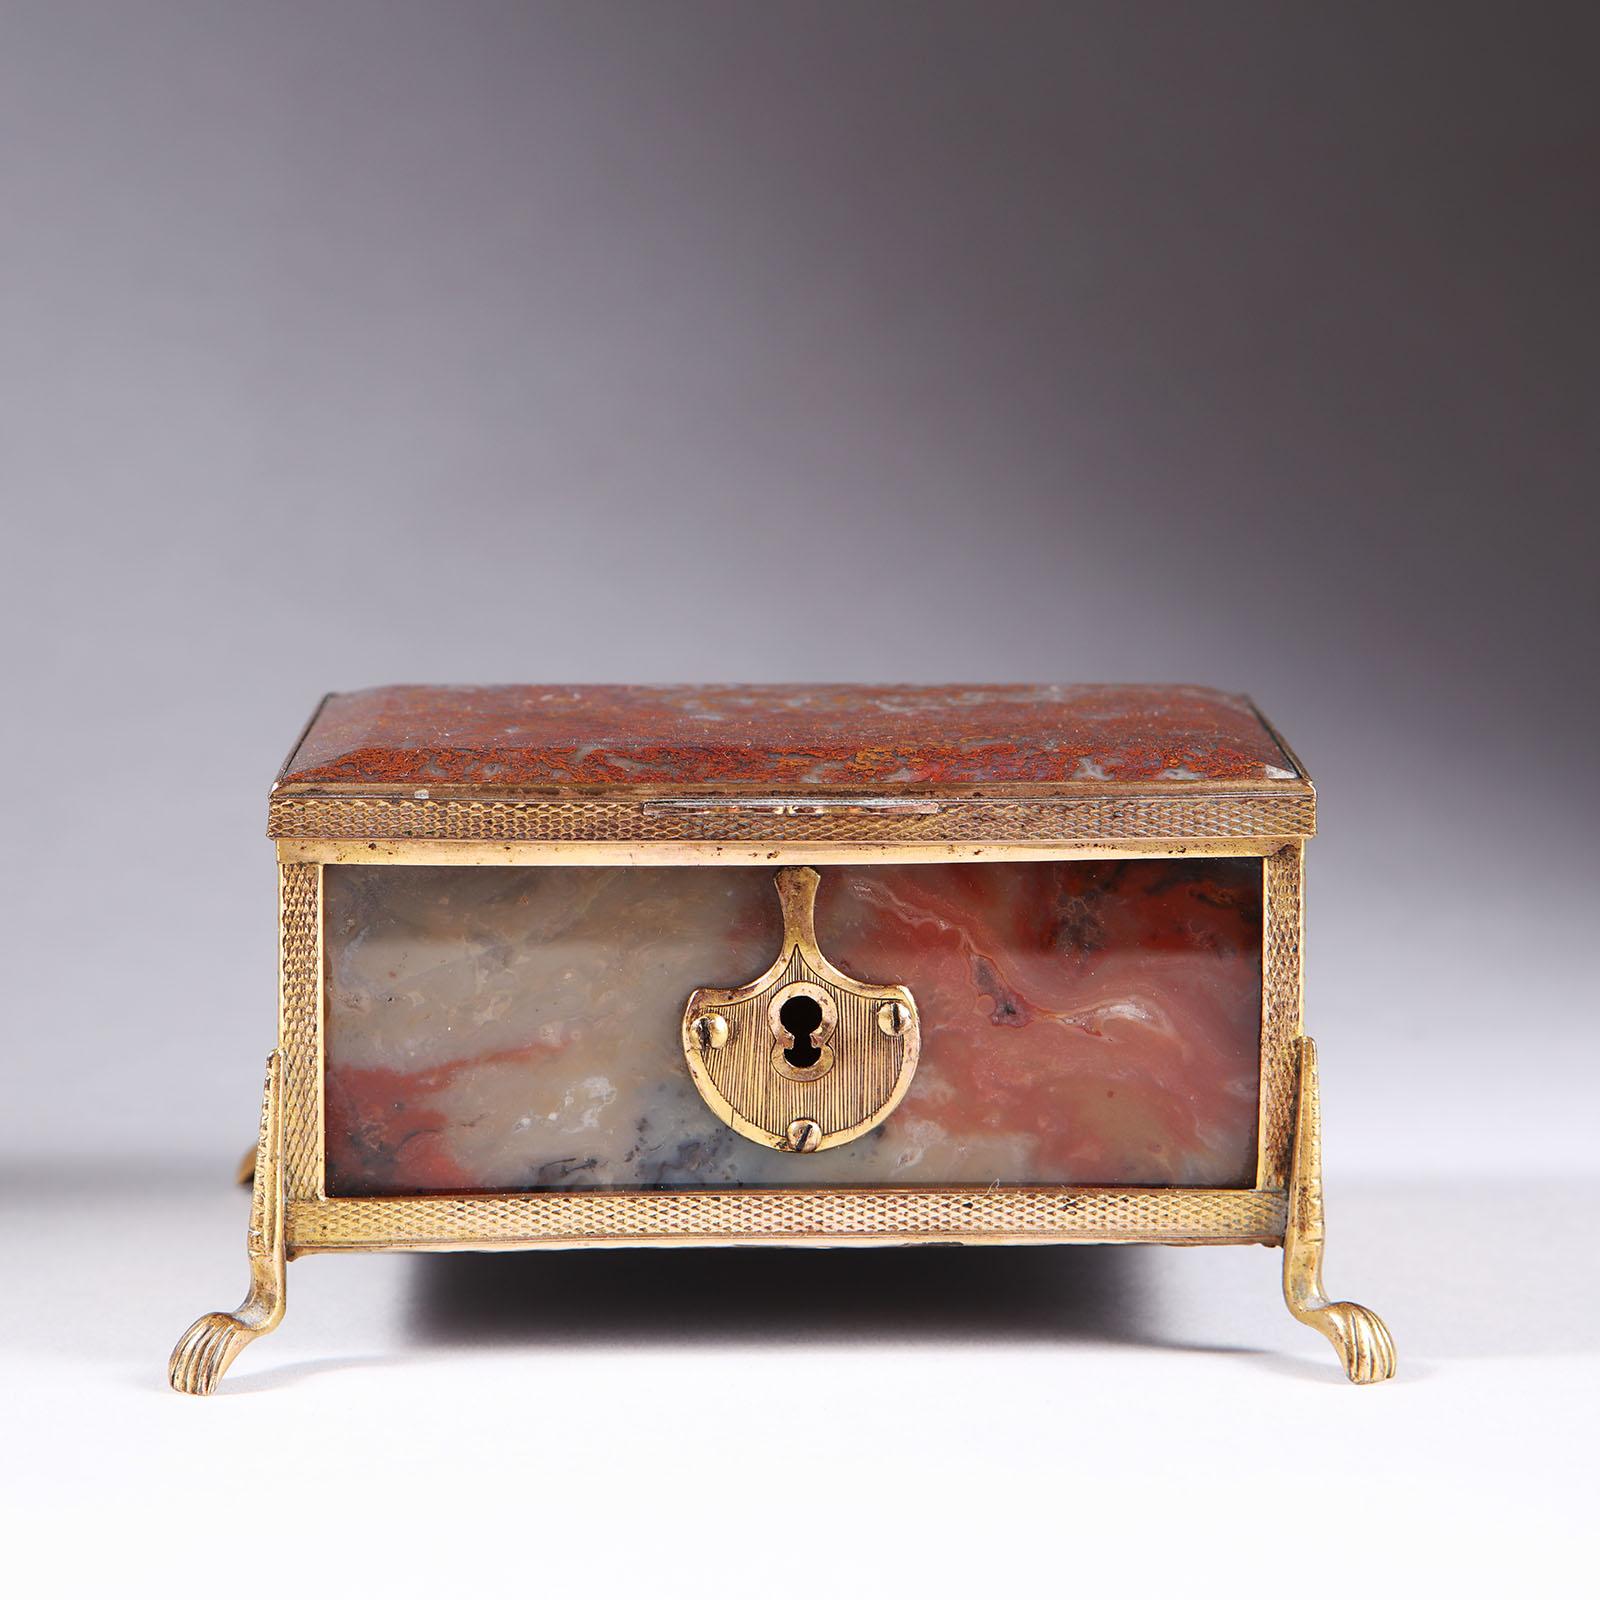 A fine 19th-century polished agate and gilt copper mounted box, all six sides with beveled panels of polished agate set within a tooled and gilt metal frame, the front detailed with a large tooled escutcheon. With a hinged lid and standing on curved